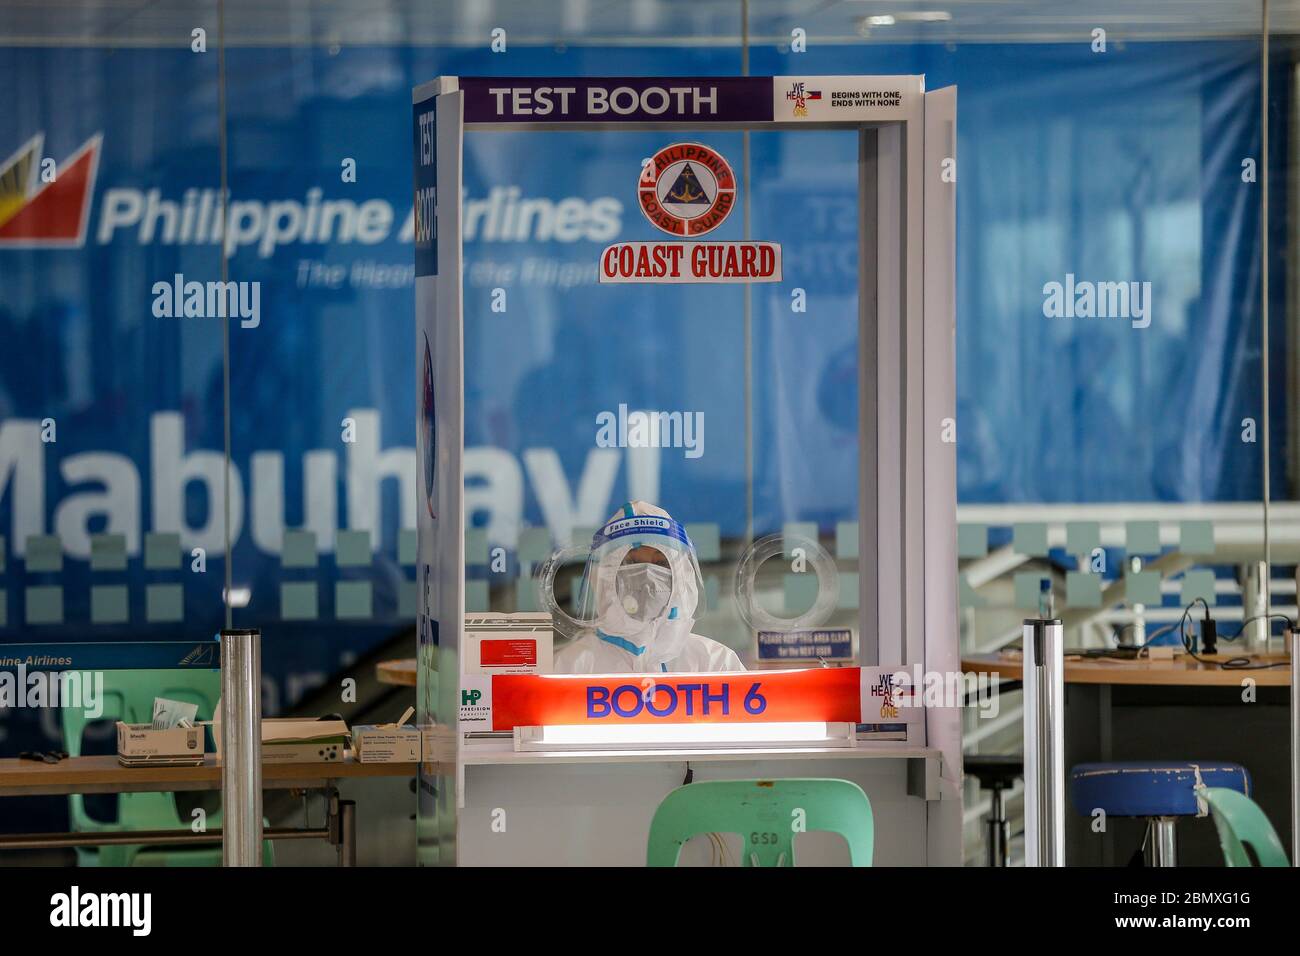 Manila. 11th May, 2020. A health worker wearing protective suit is seen inside a COVID-19 testing booth as waiting for the arrival of Filipinos returning from London at the Manila Ninoy Aquino International Airport in the Philippines, May 11, 2020. All foreigners and Filipinos arriving in the Philippines need to undergo testing for the COVID-19 and quarantine to stem the spread of the virus, Presidential spokesperson Harry Roque said on Monday. Credit: Rouelle Umali/Xinhua/Alamy Live News Stock Photo